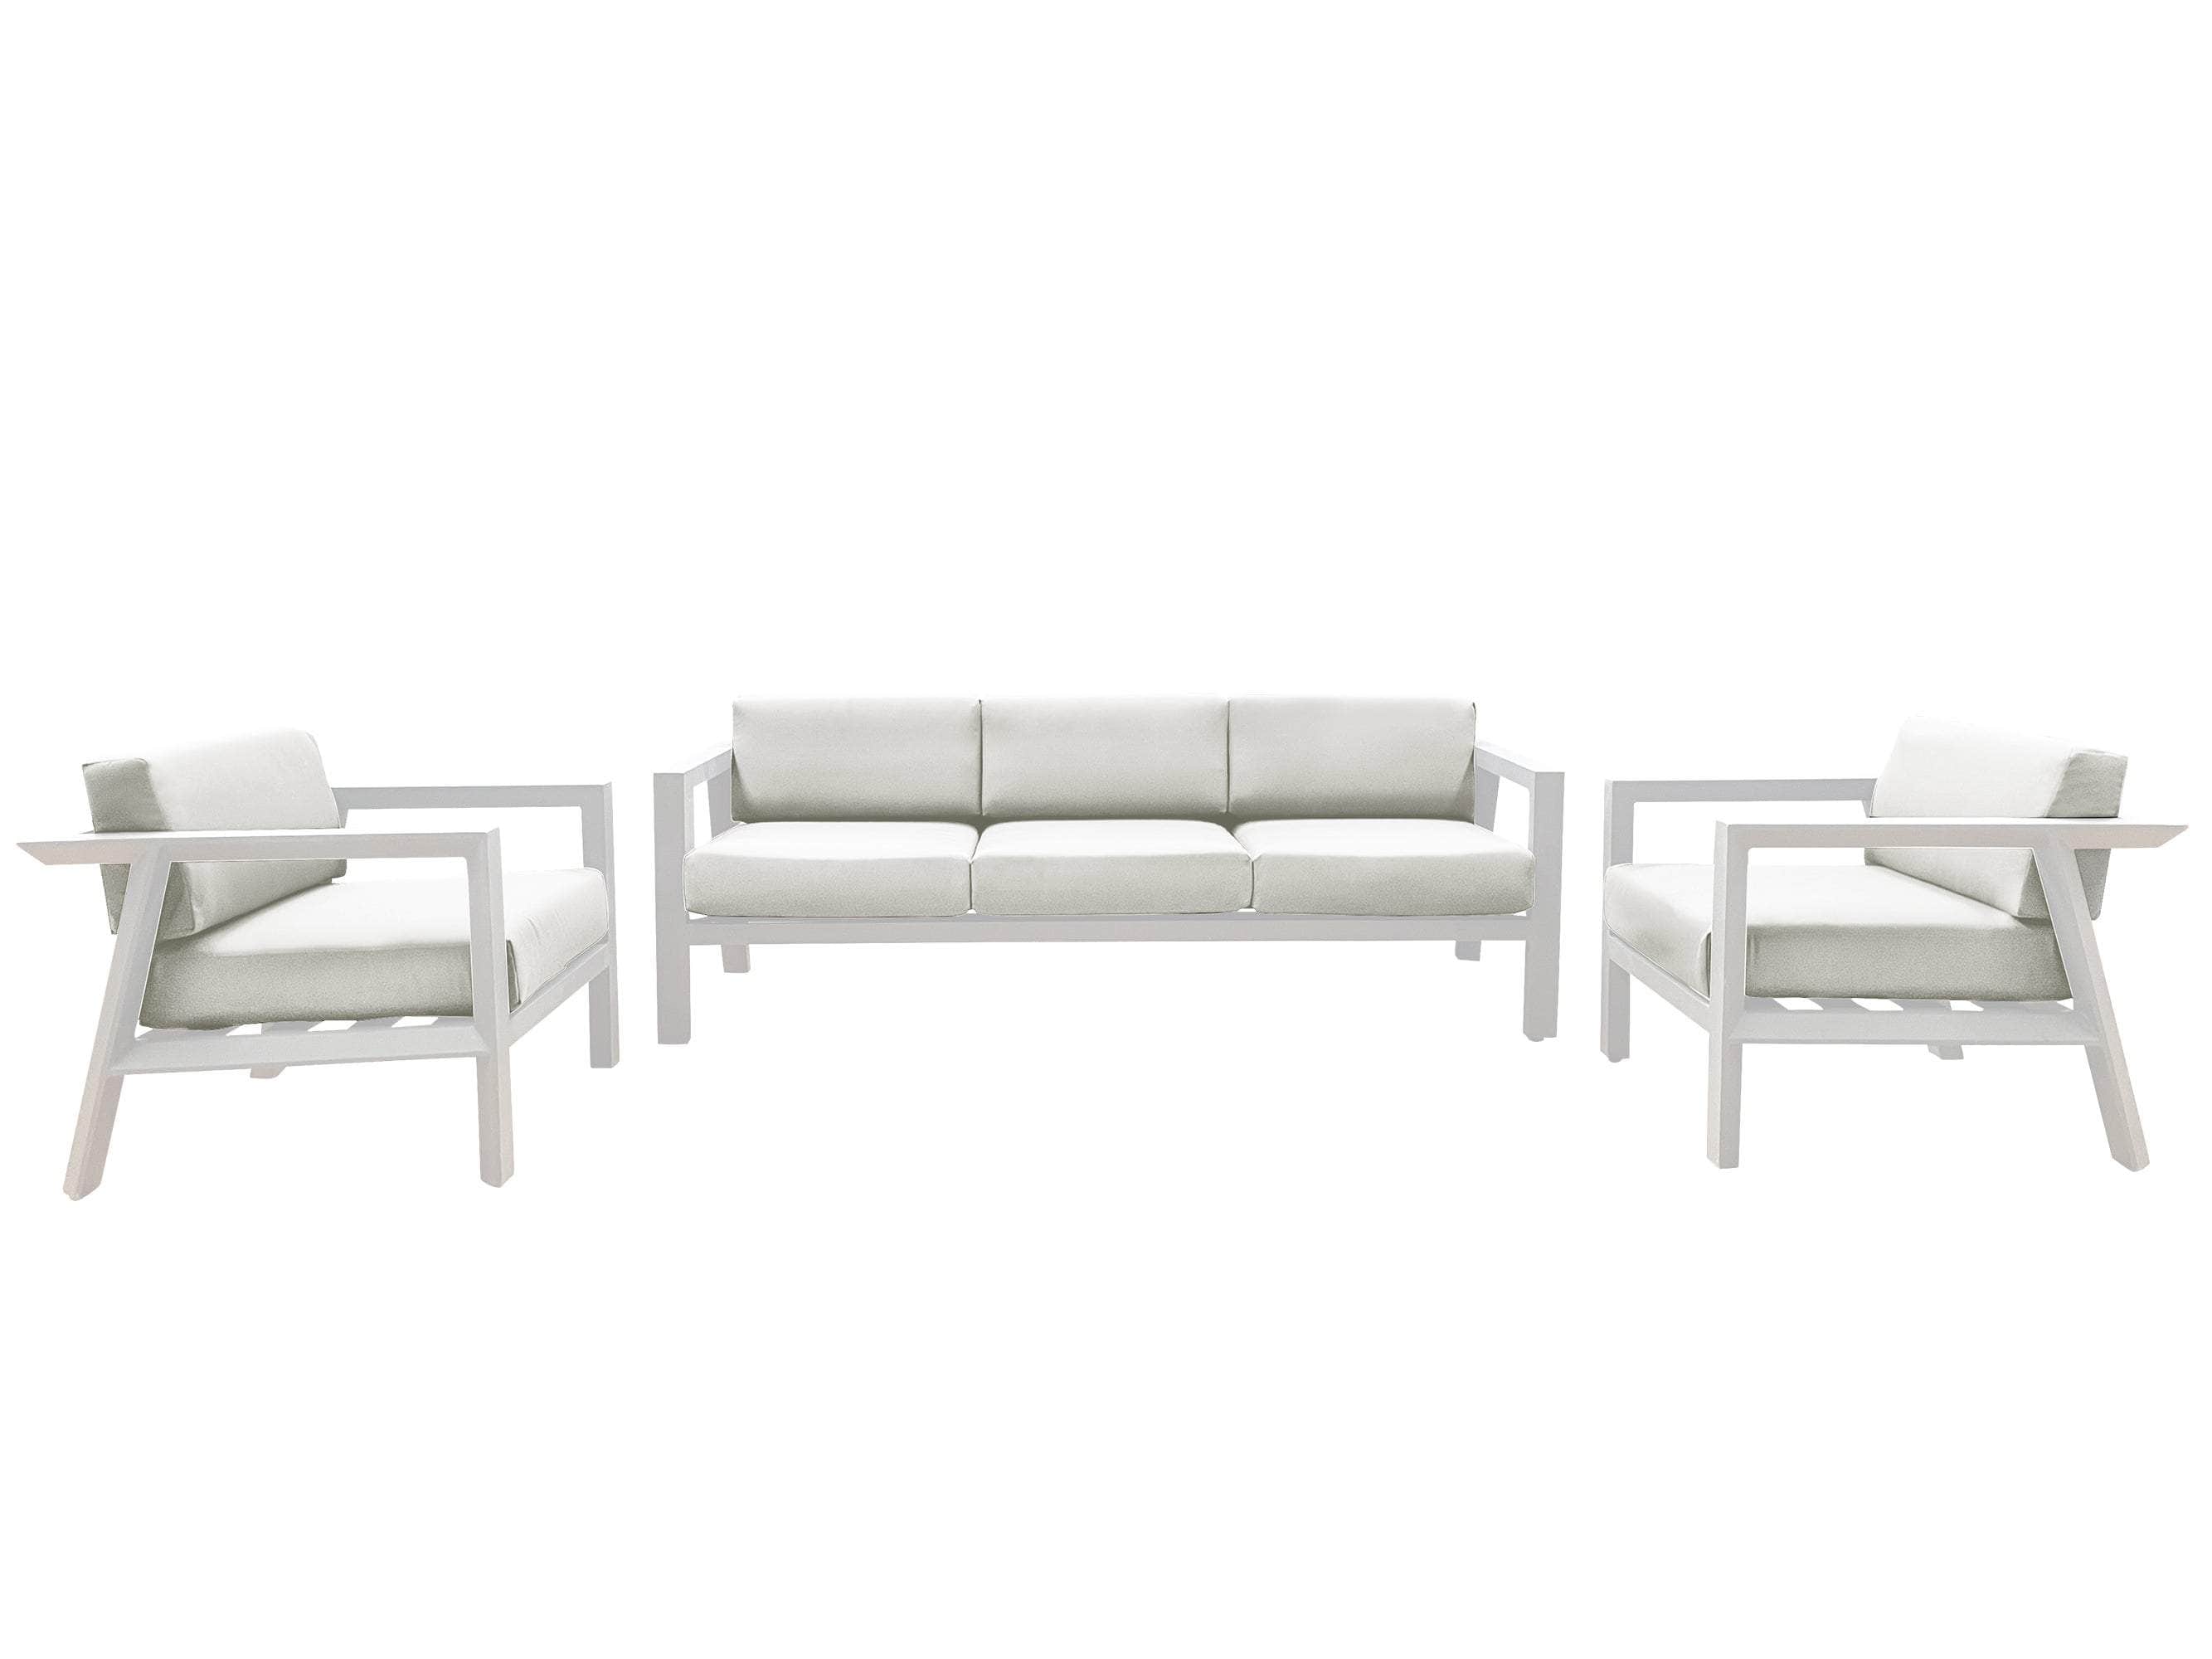 CIEUX Sofa Set Canvas Natural Corsica Outdoor Patio Aluminum Metal Sofa Conversation Set in White with Sunbrella Cushions - Available in 2 Colours